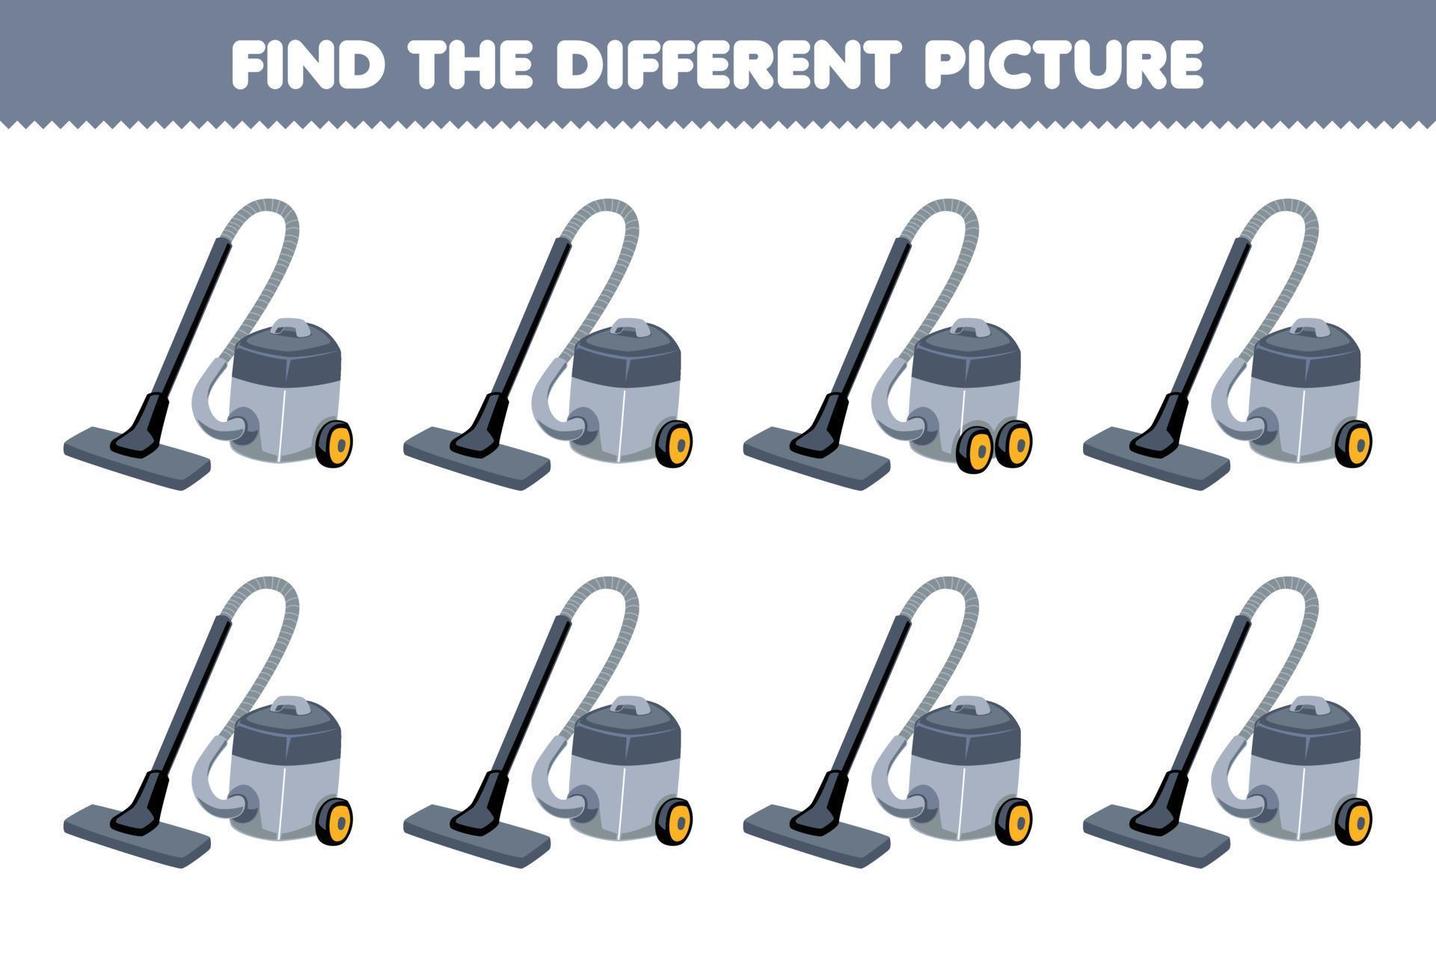 Education game for children find the different picture of cute cartoon vacuum cleaner printable tool worksheet vector